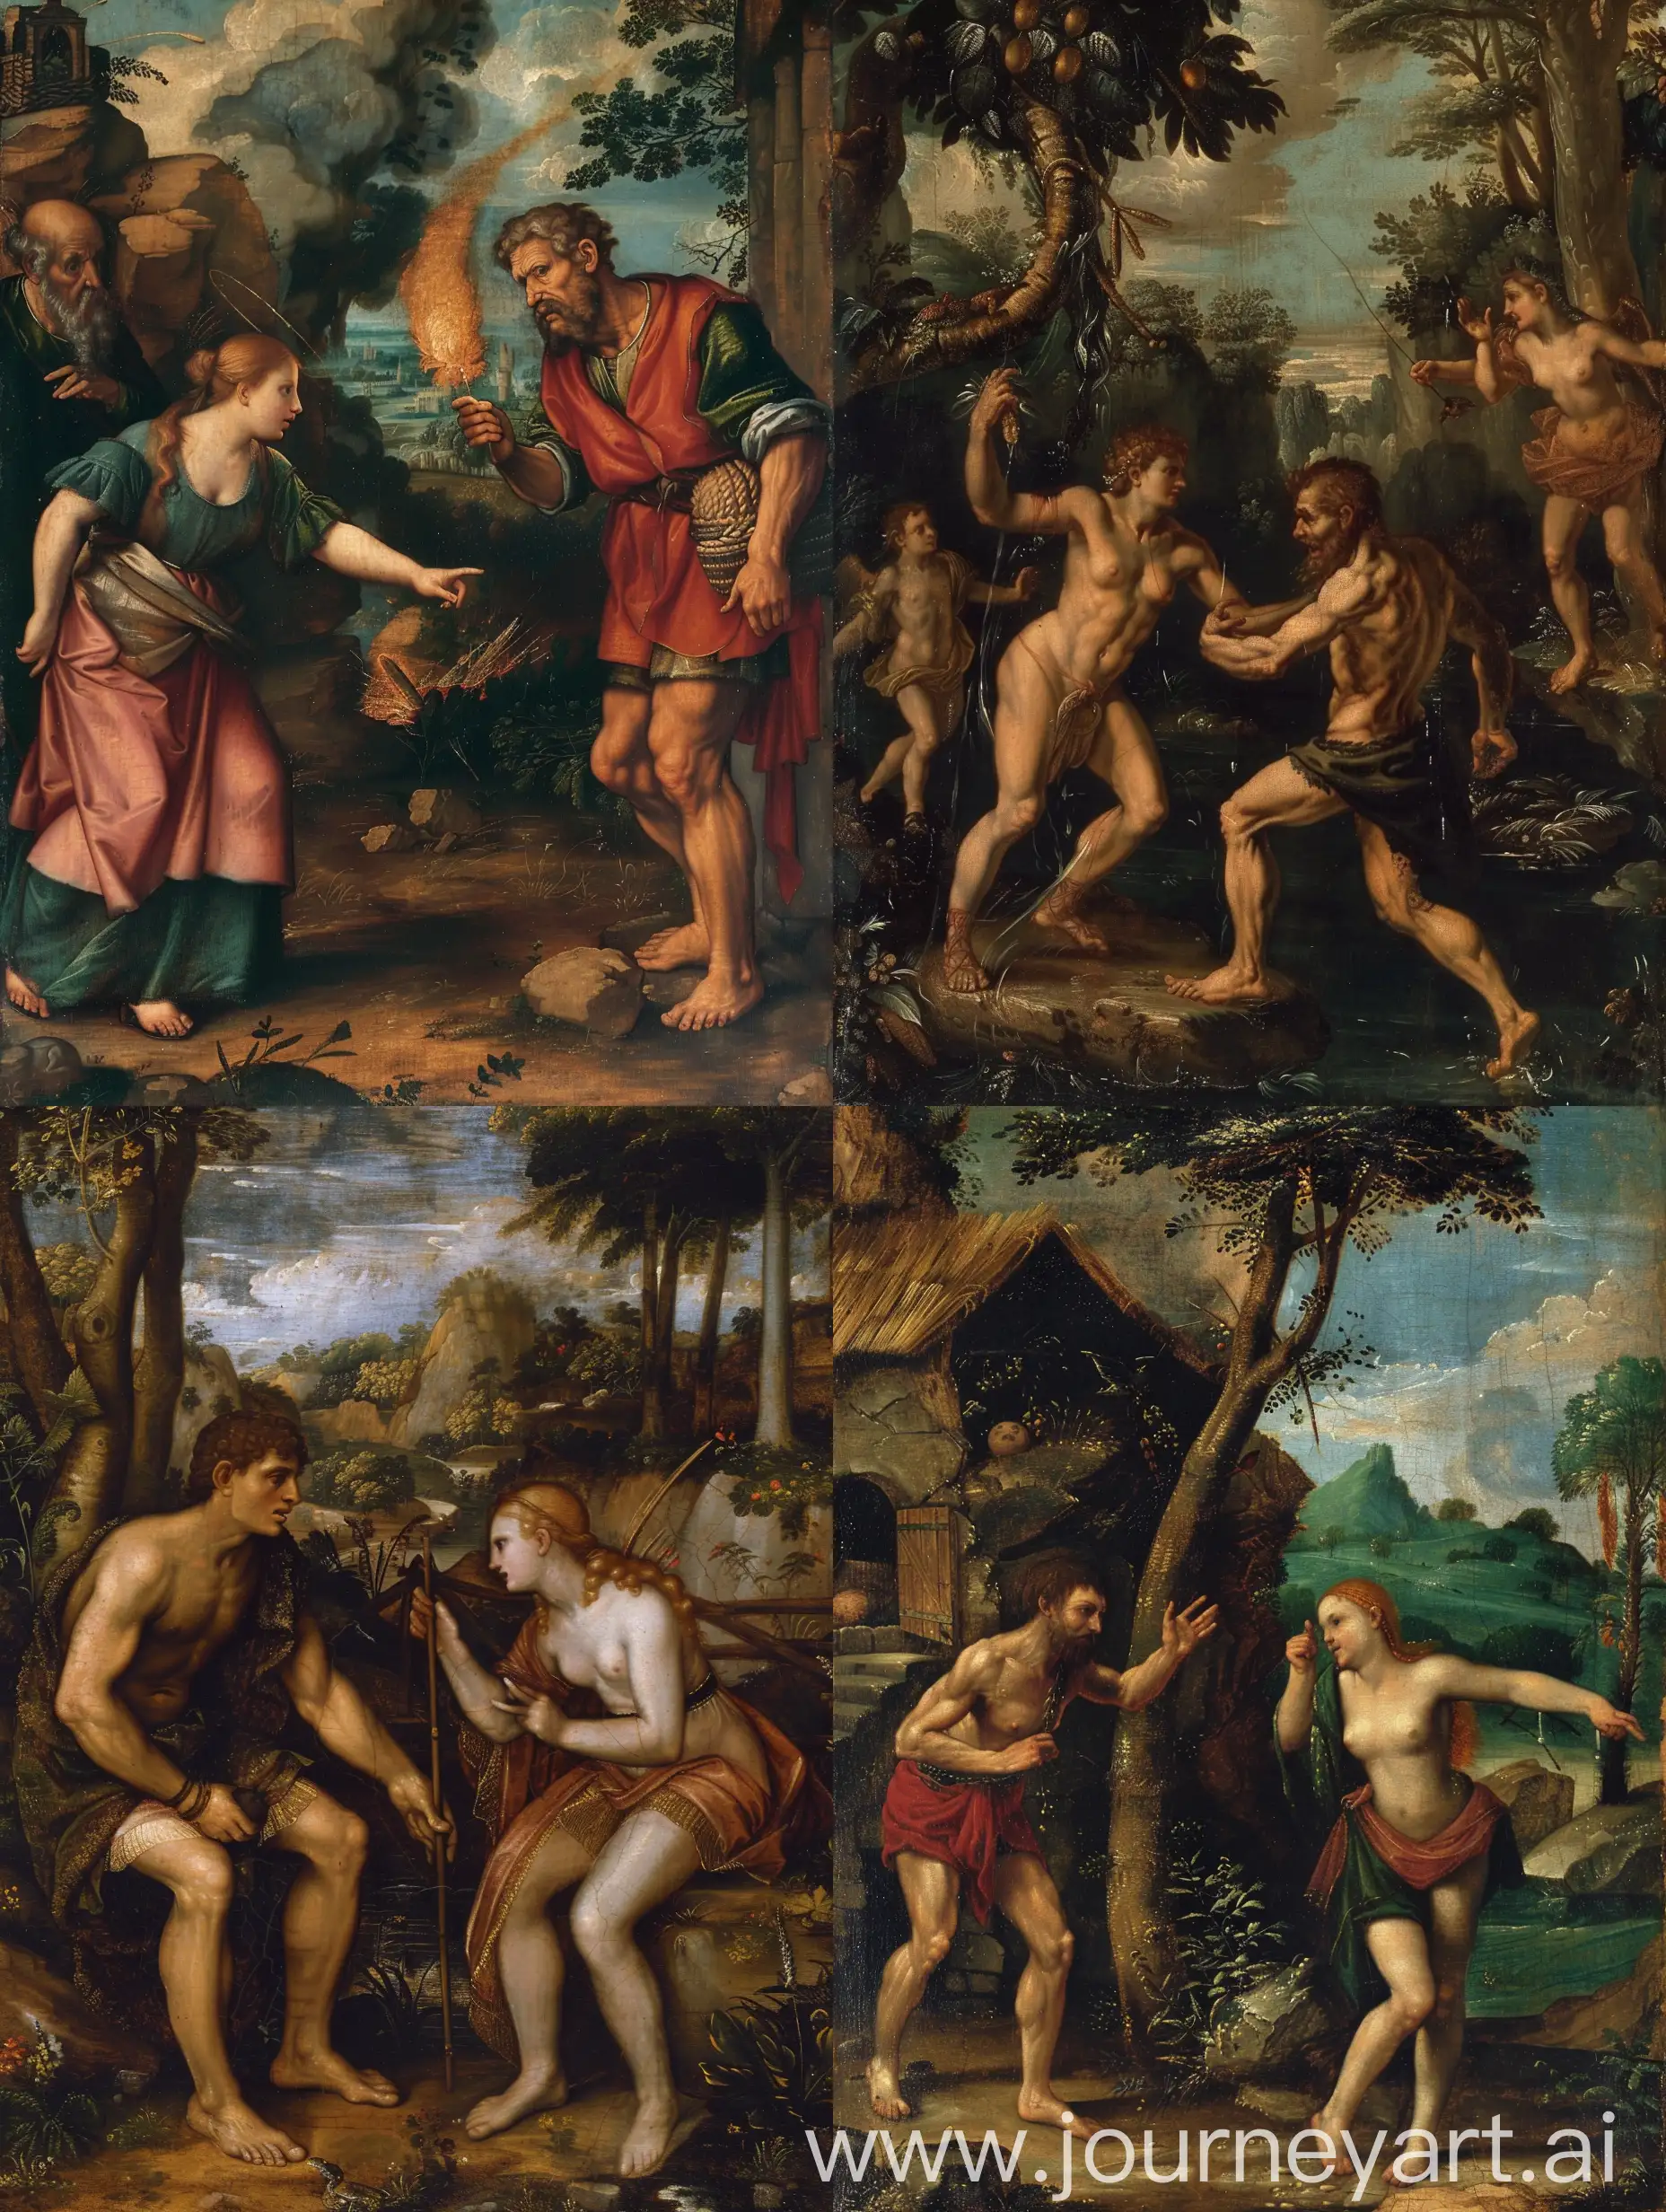 Adam and Eve being expelled from Eden painting, In the Renaissance style